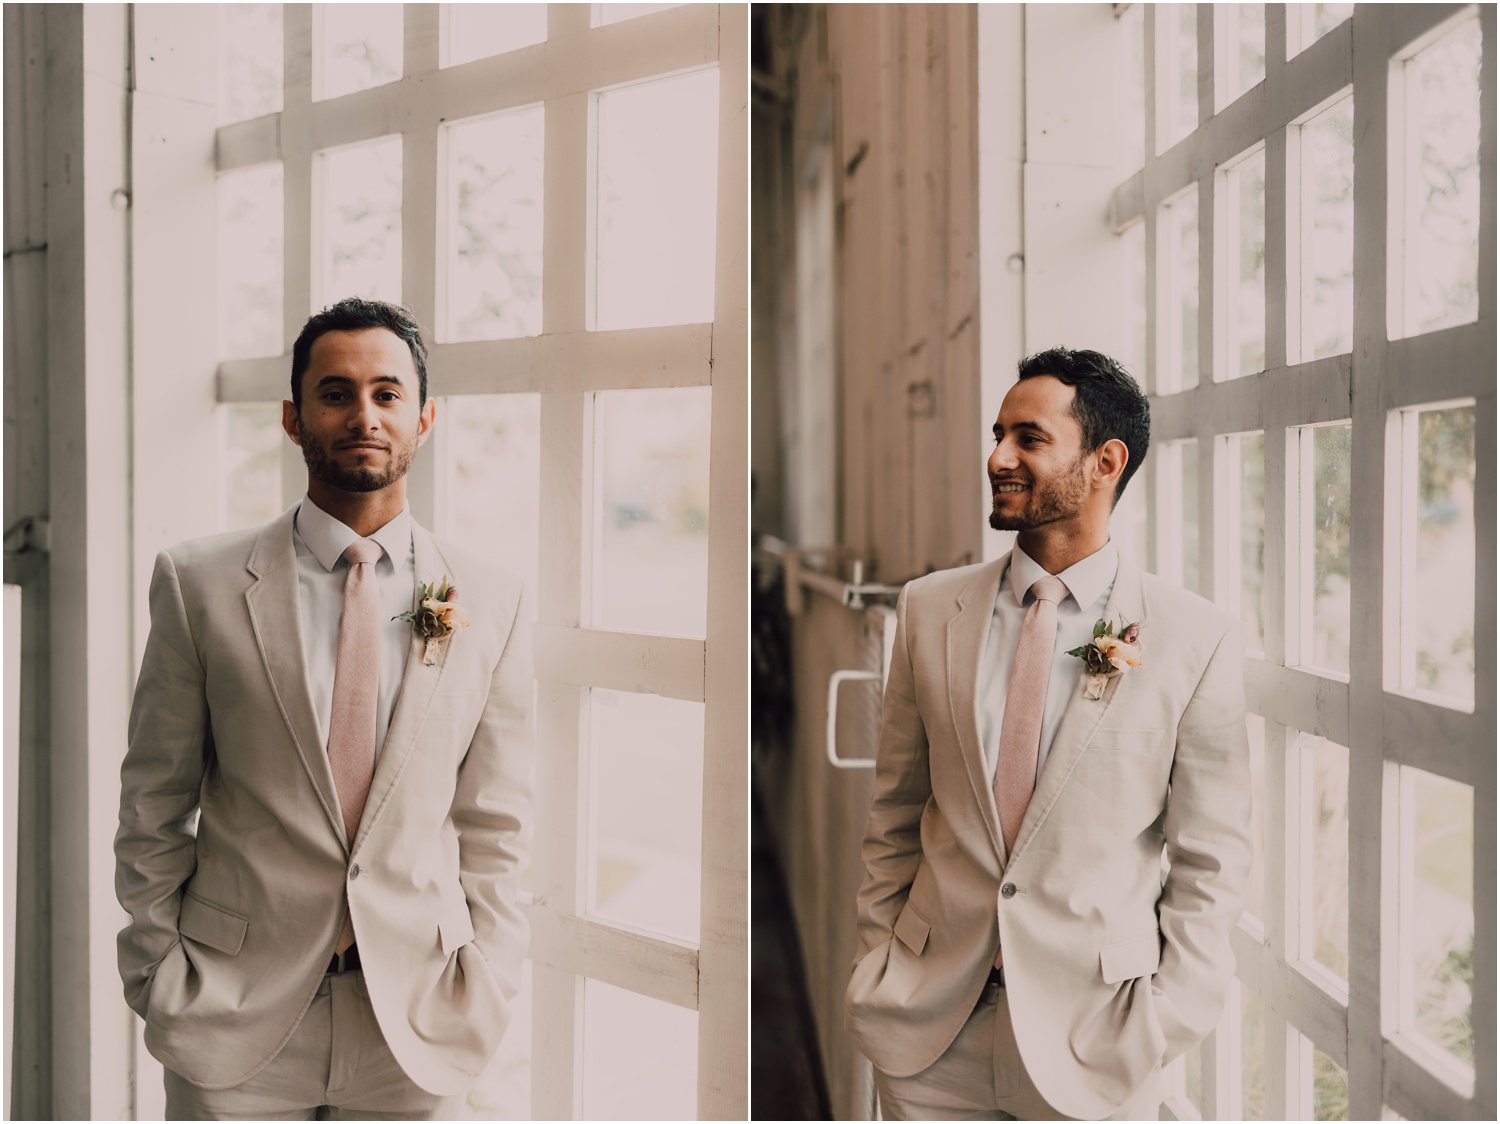 Groom wearing tan suit and blush tie